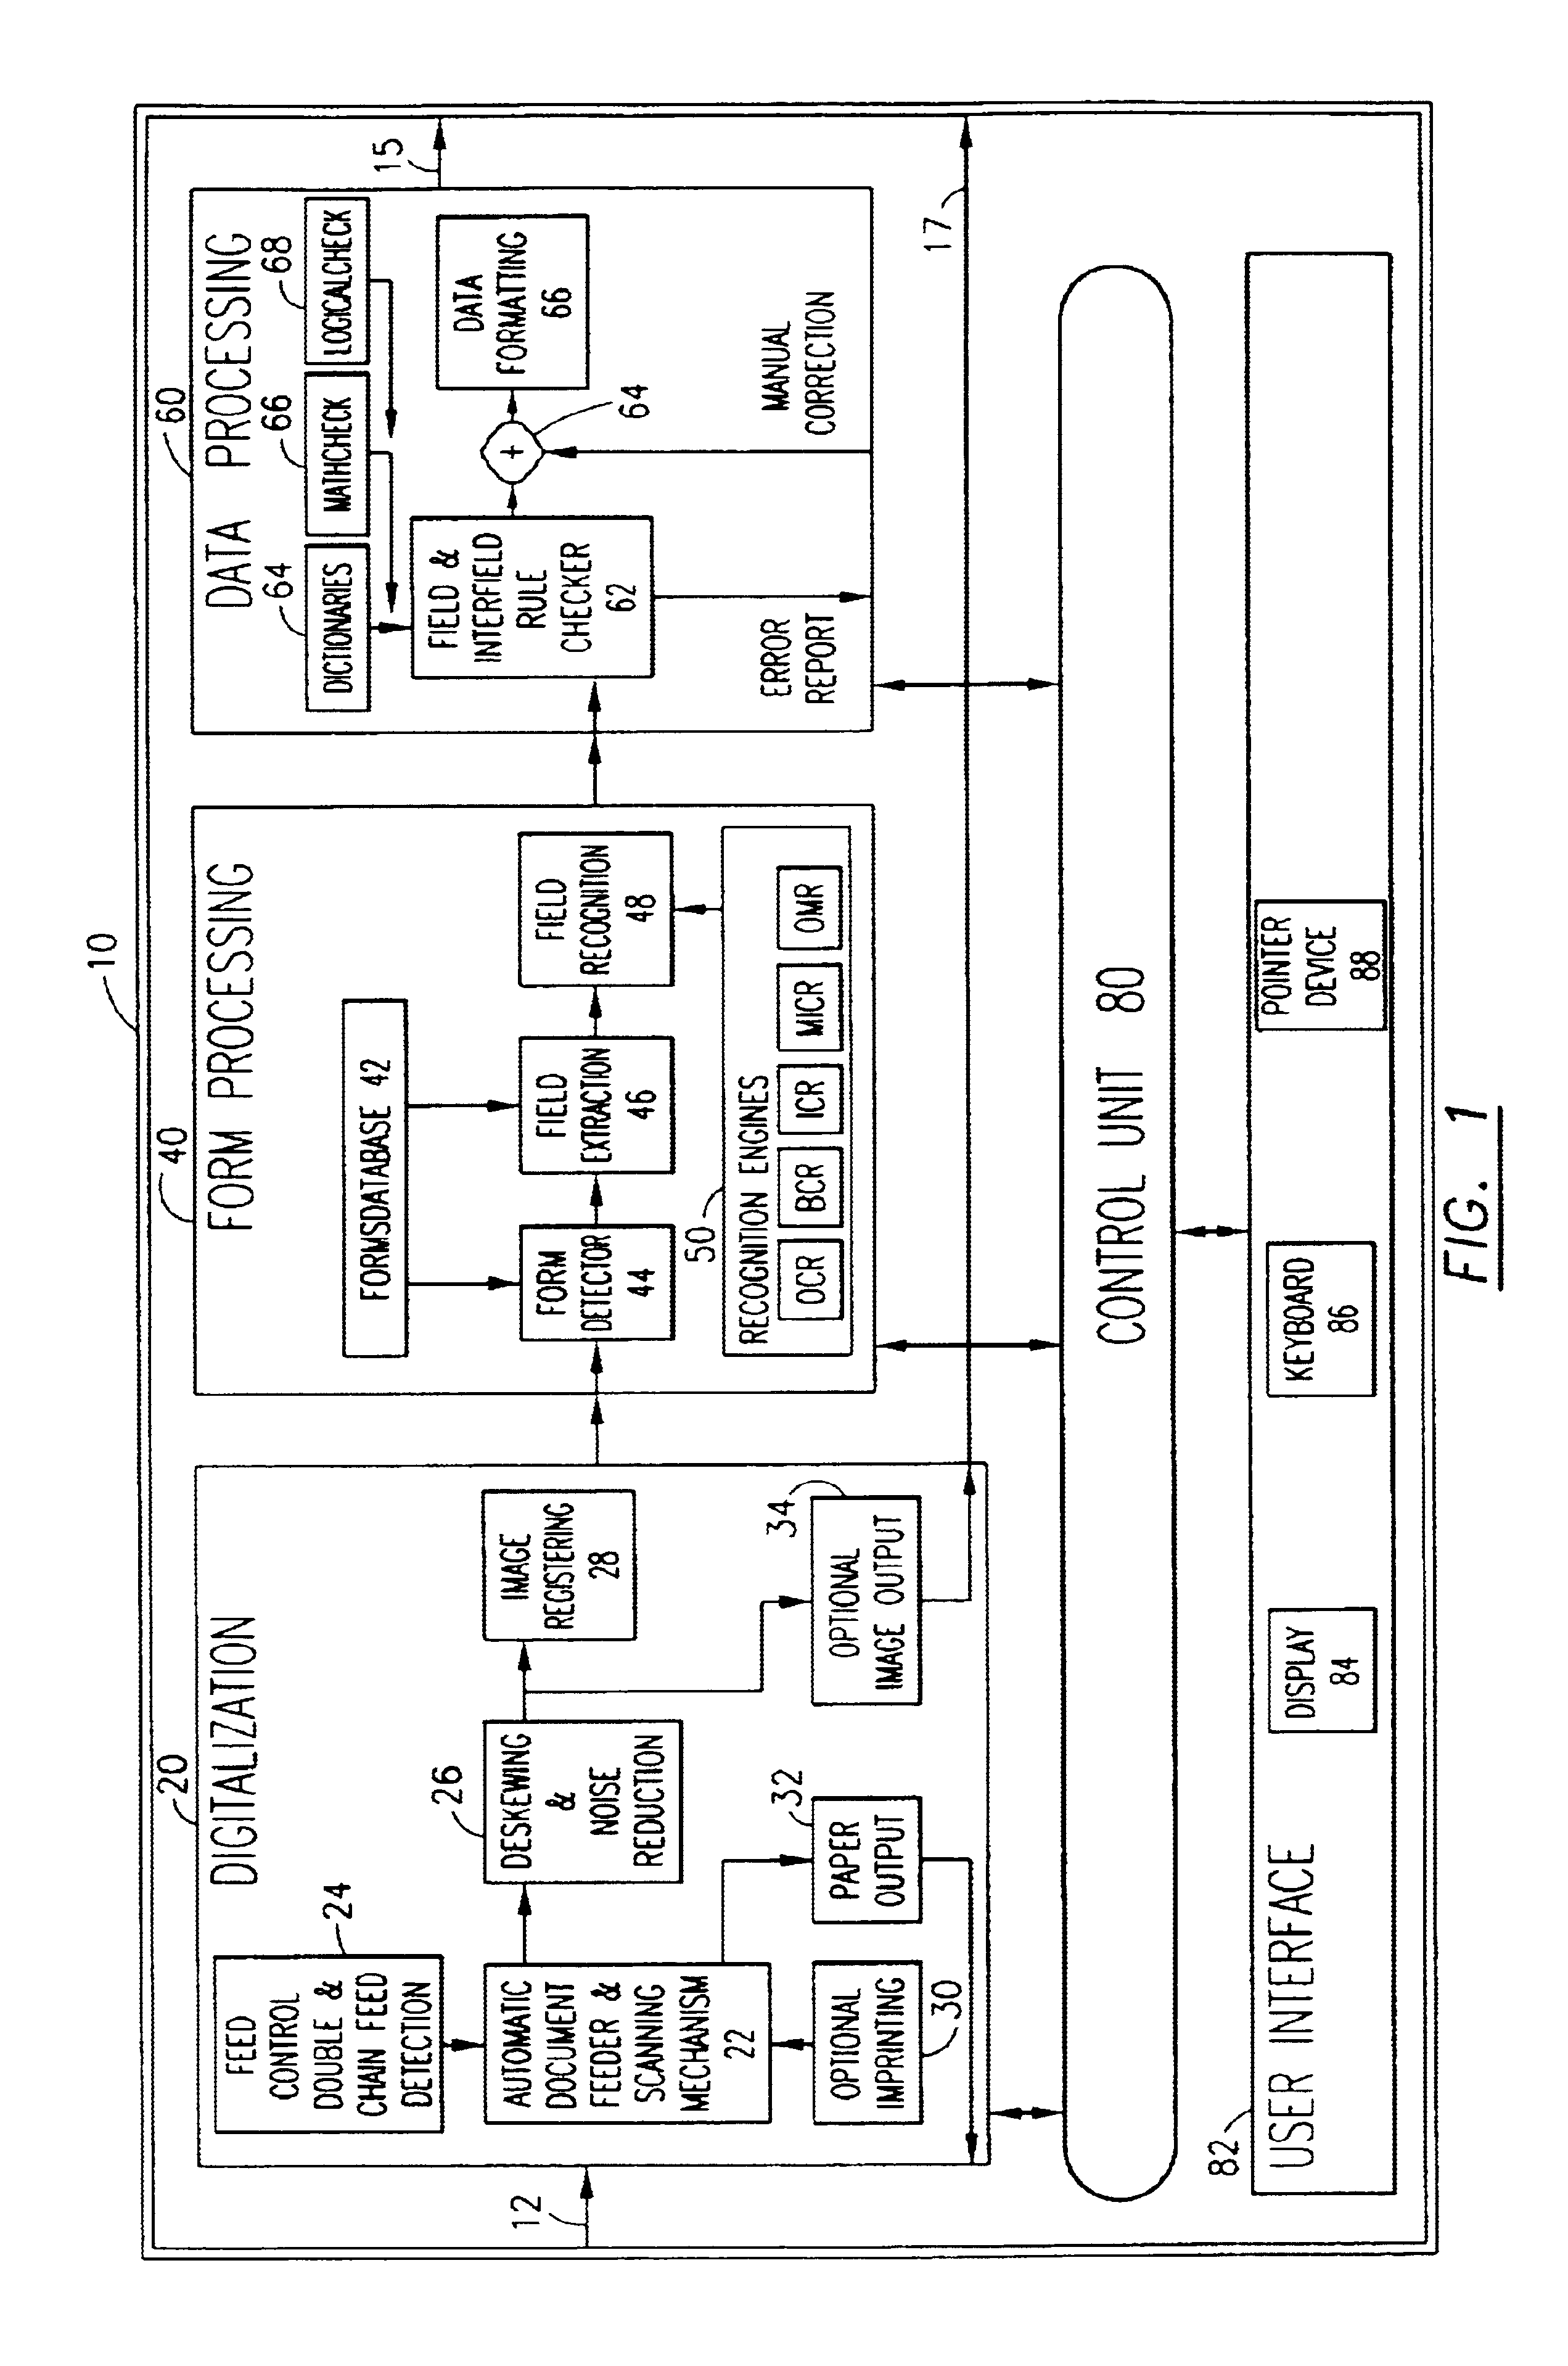 Document scanner, system and method